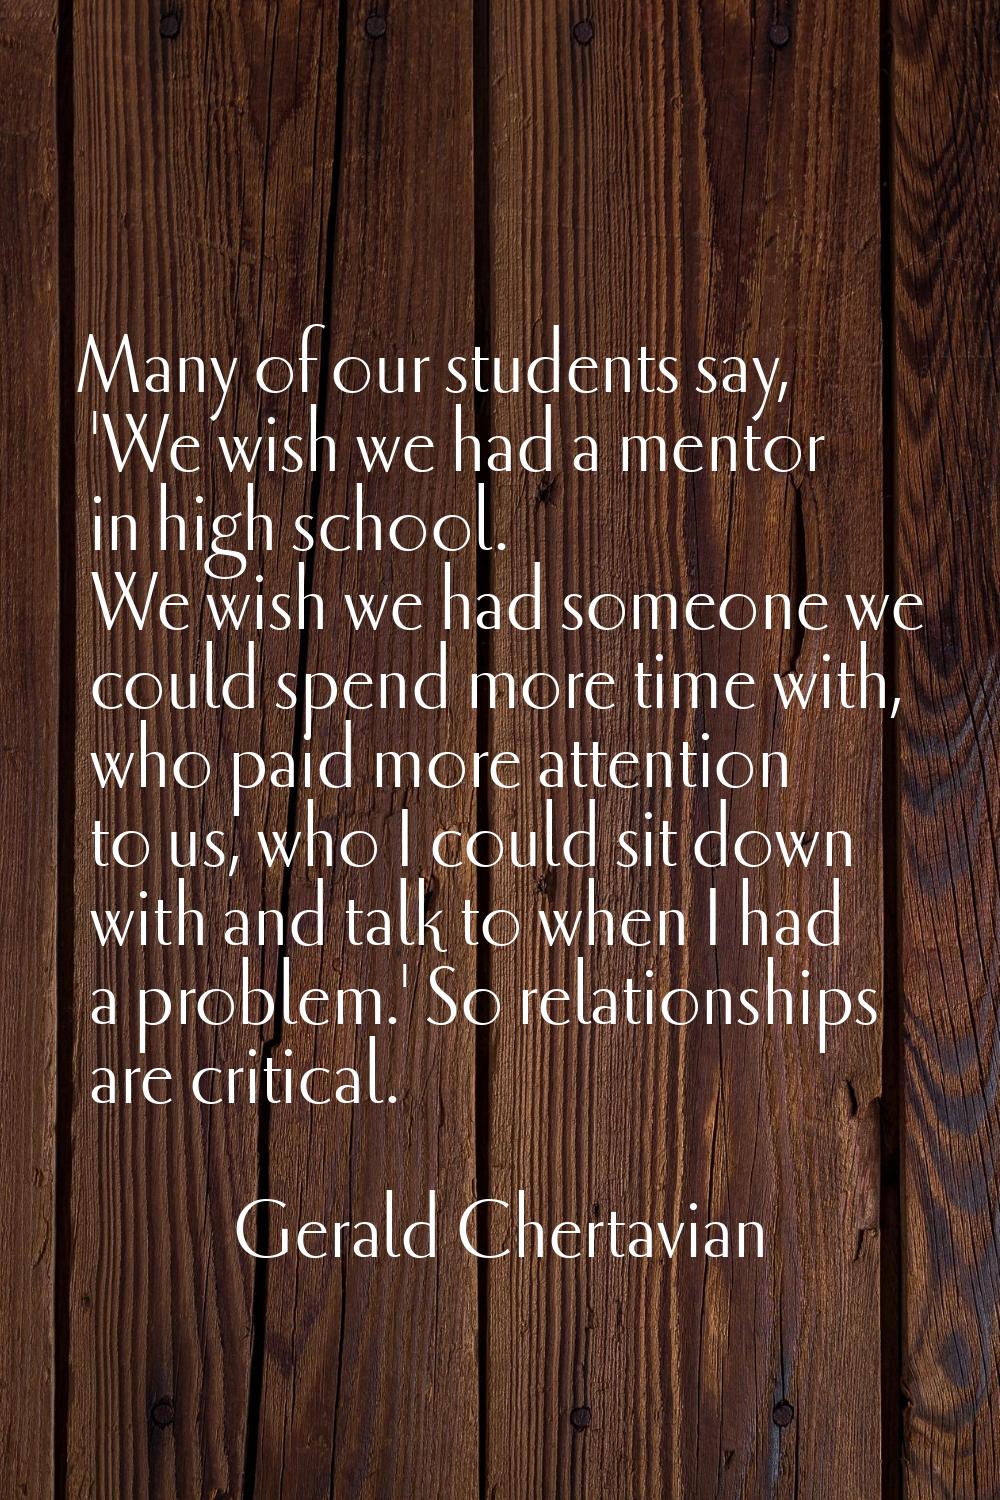 Many of our students say, 'We wish we had a mentor in high school. We wish we had someone we could 